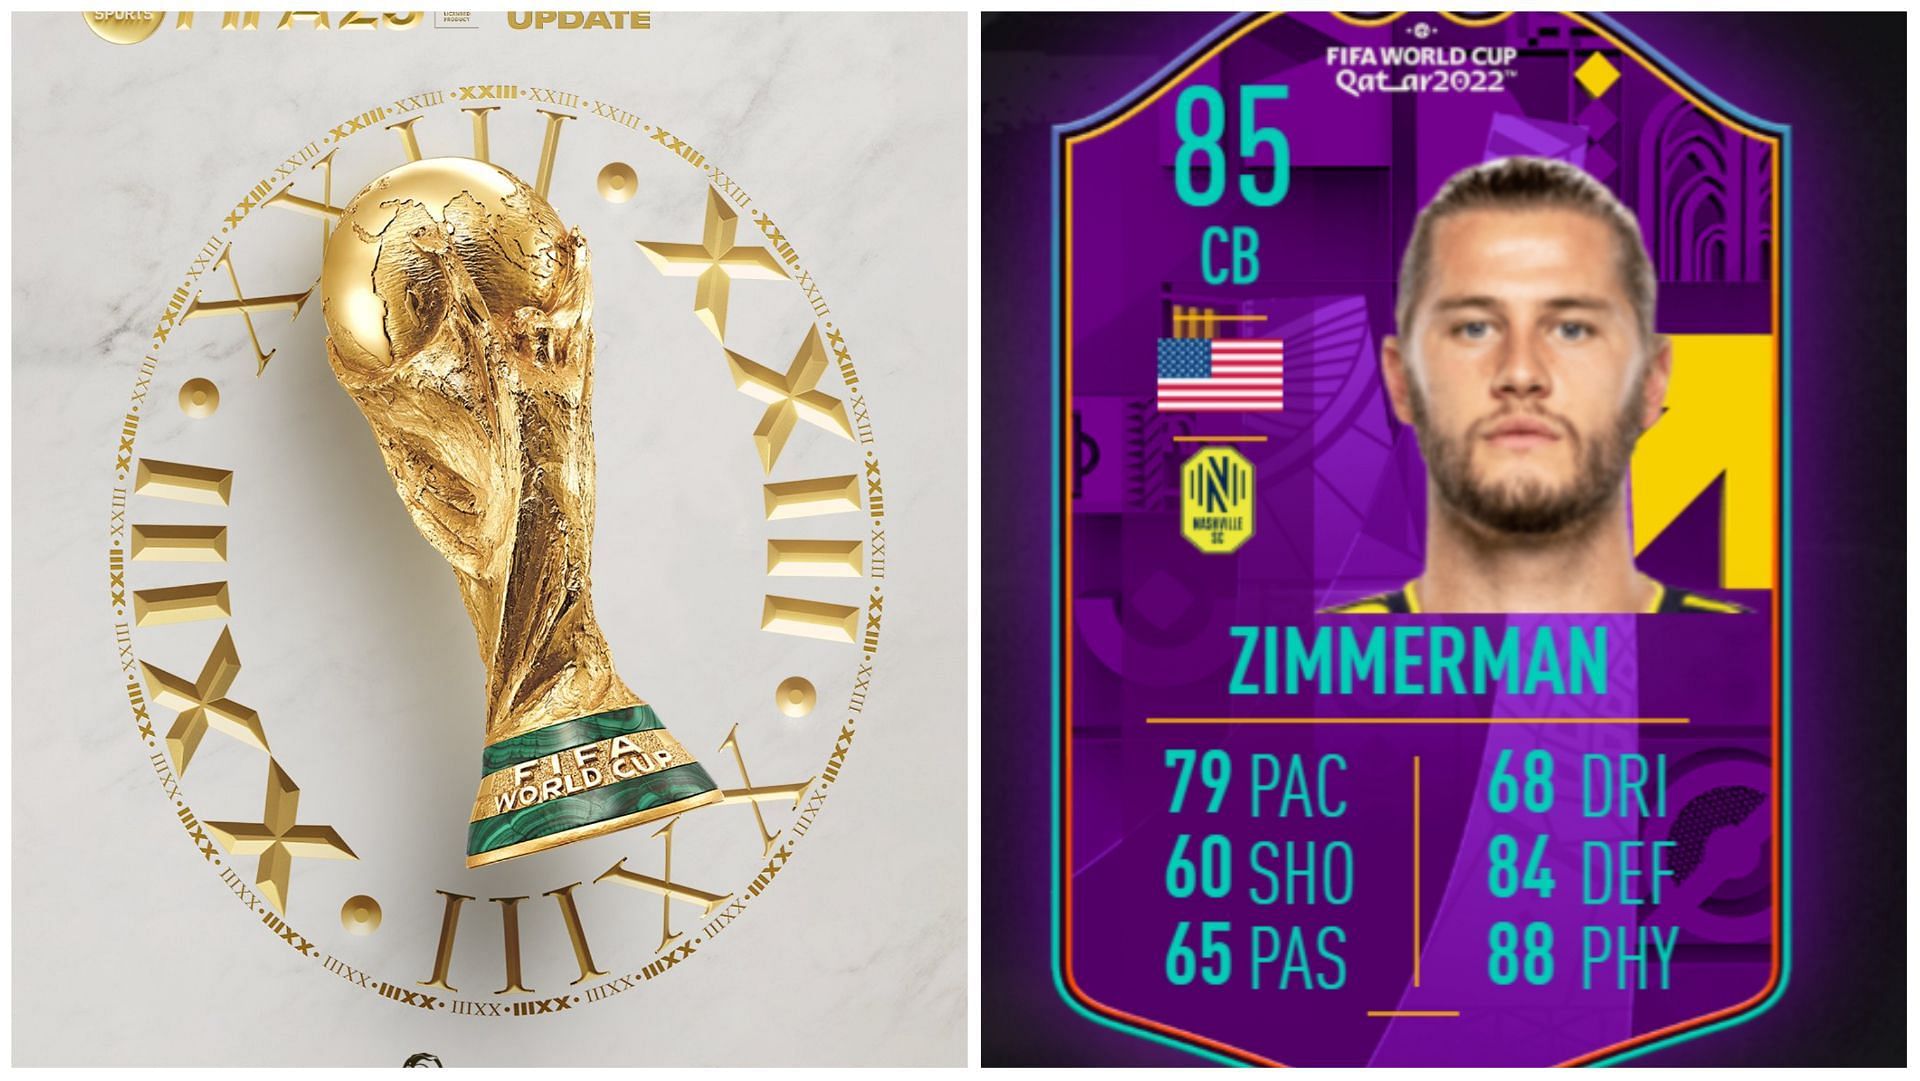 Walker Zimmerman has received an SBC card in FIFA 23 (Images via EA Sports)